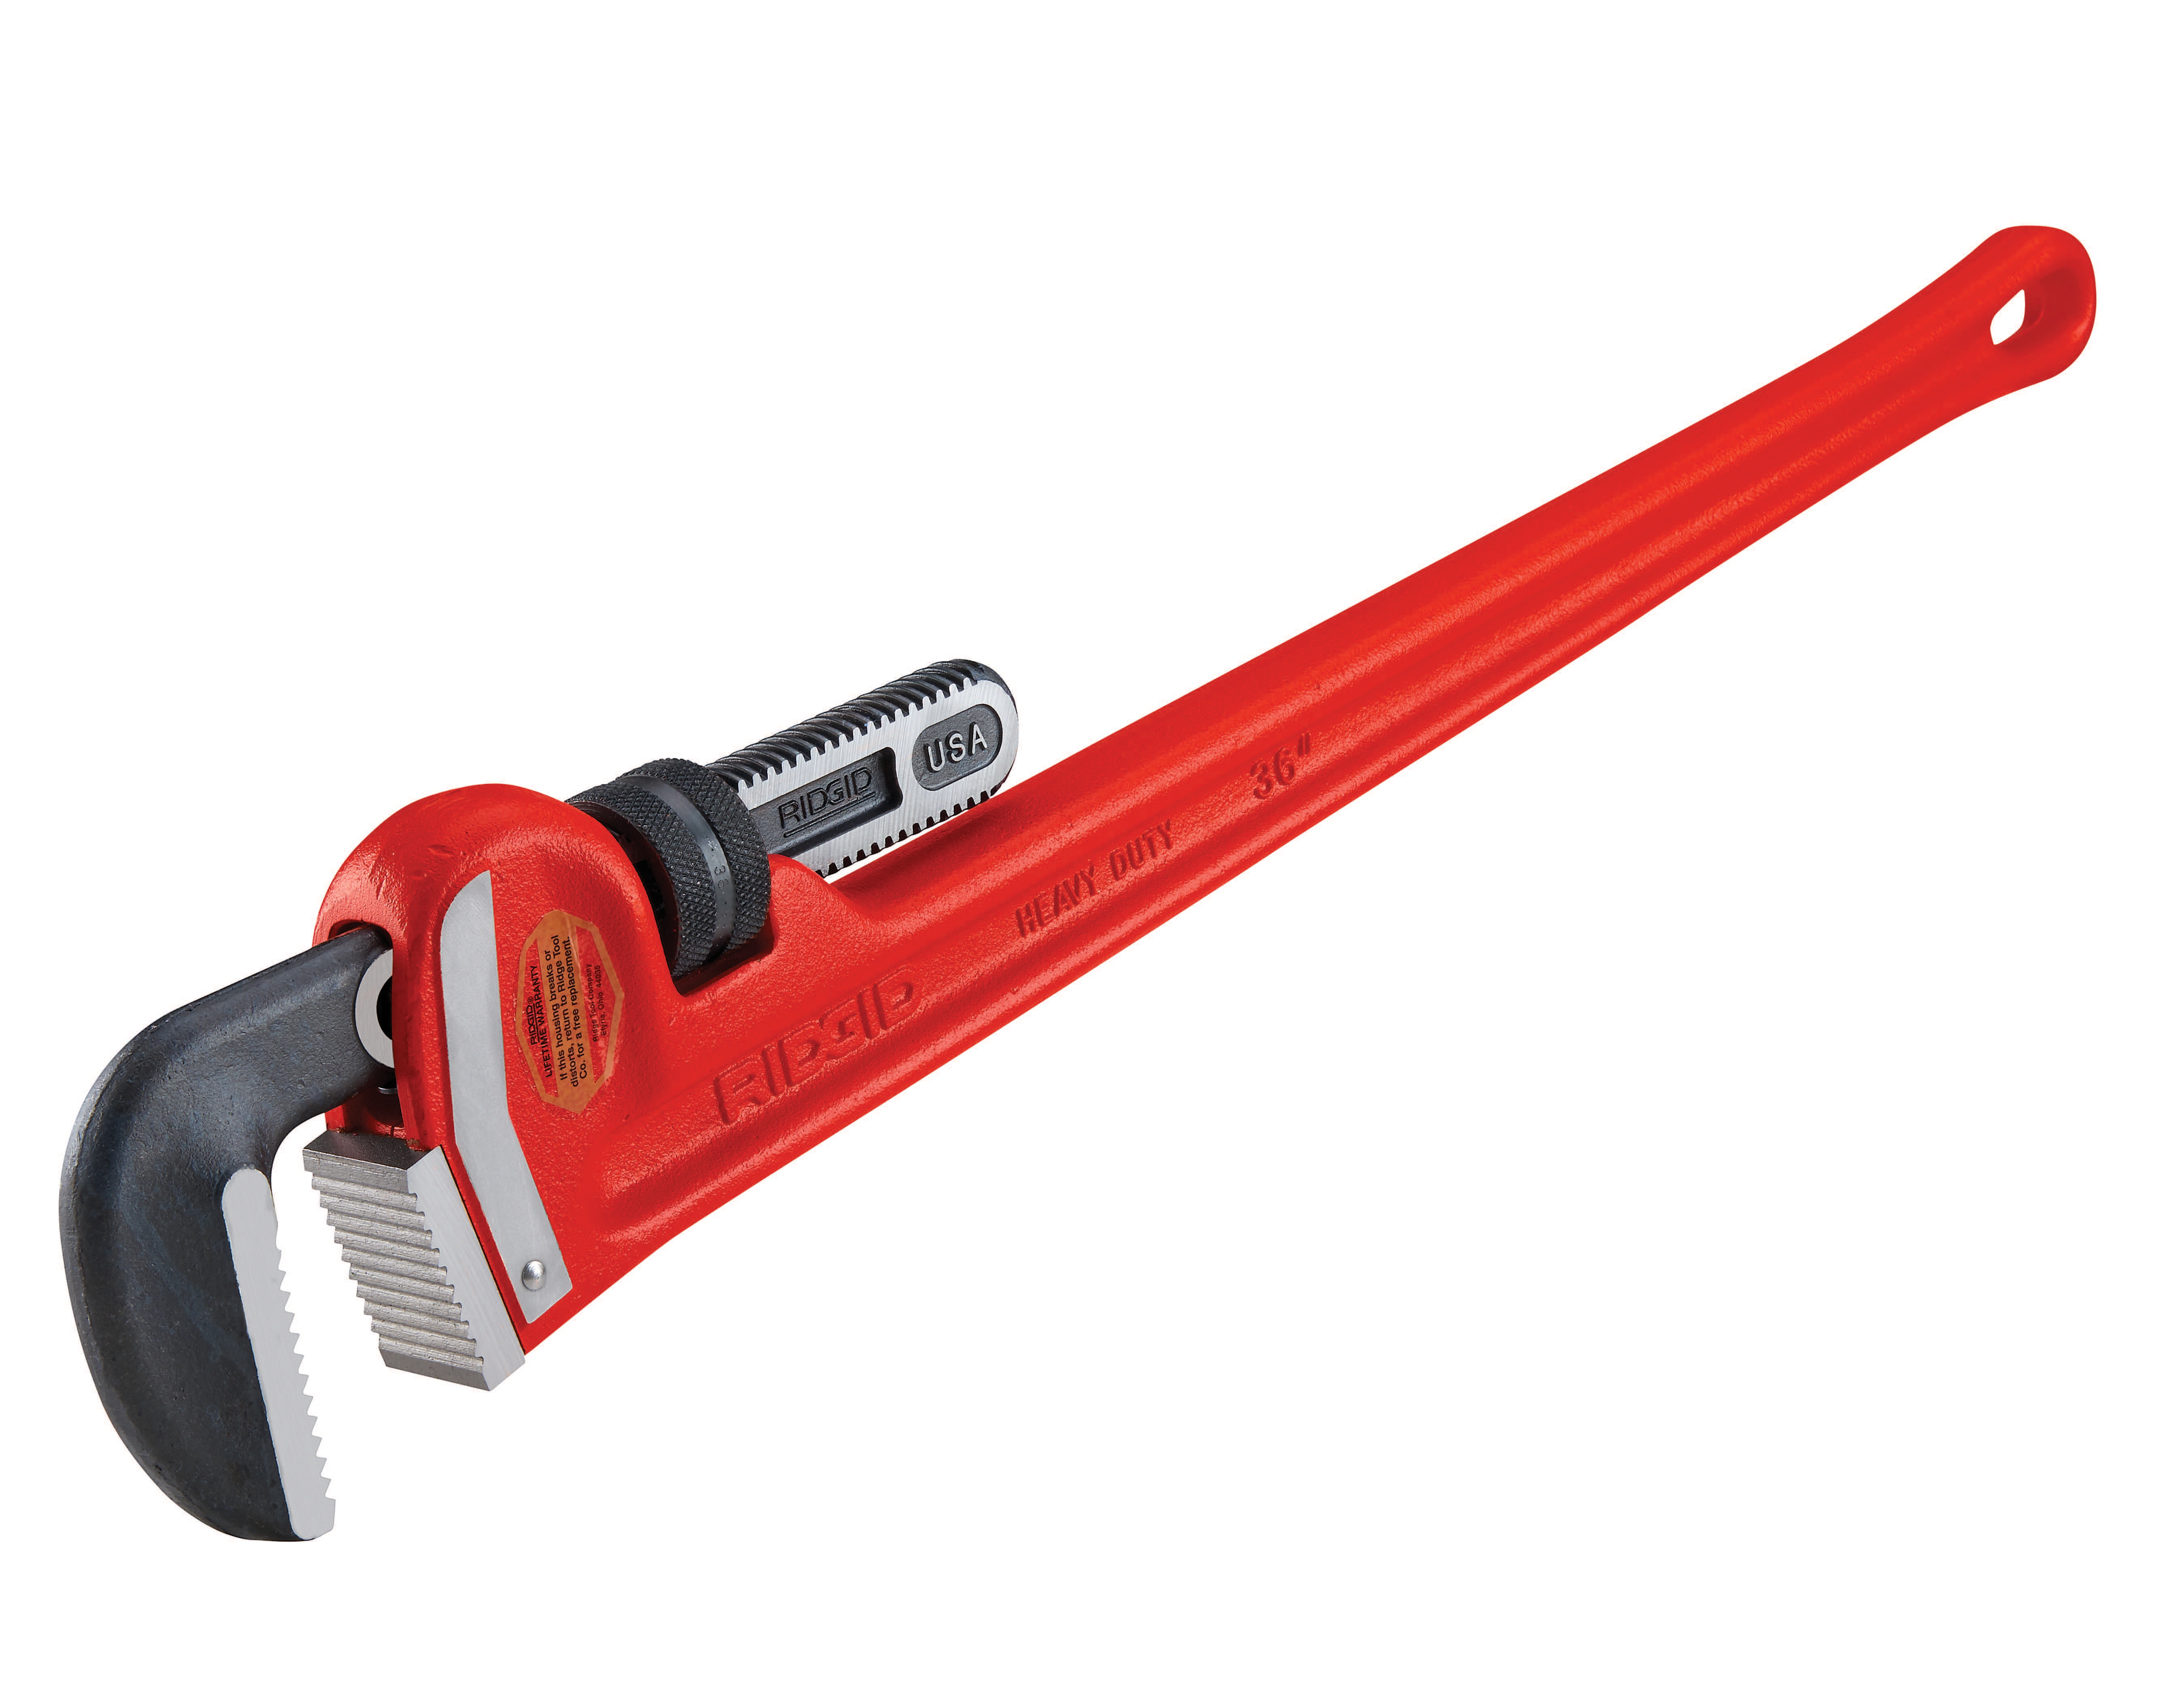 31035 36-in Heavy-Duty Straight Pipe Wrench